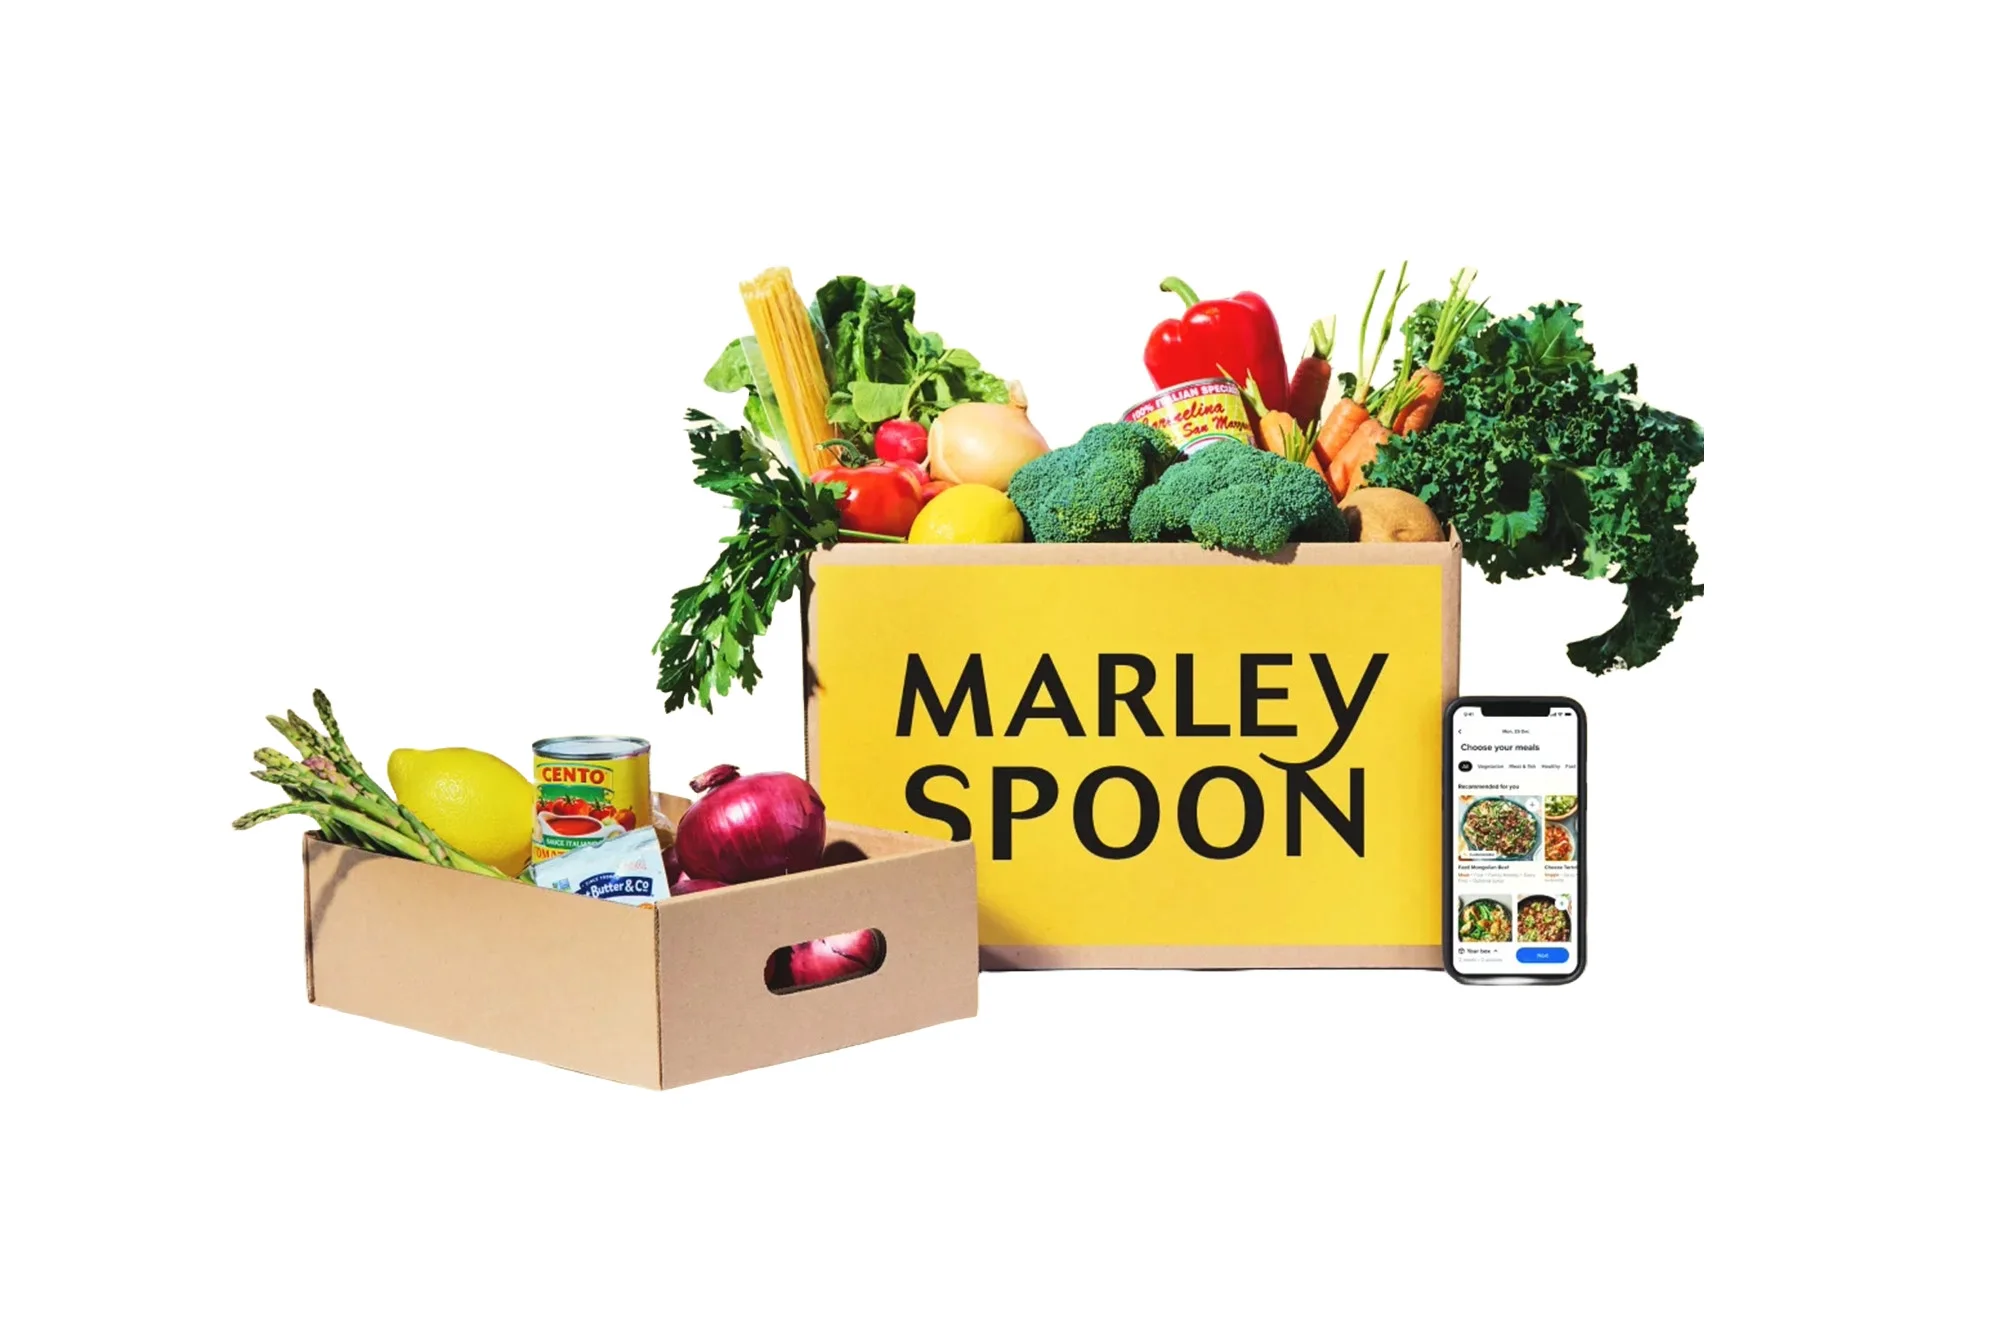 A Marley Spoon box filled with produce, with a phone open to the brand's site next to it